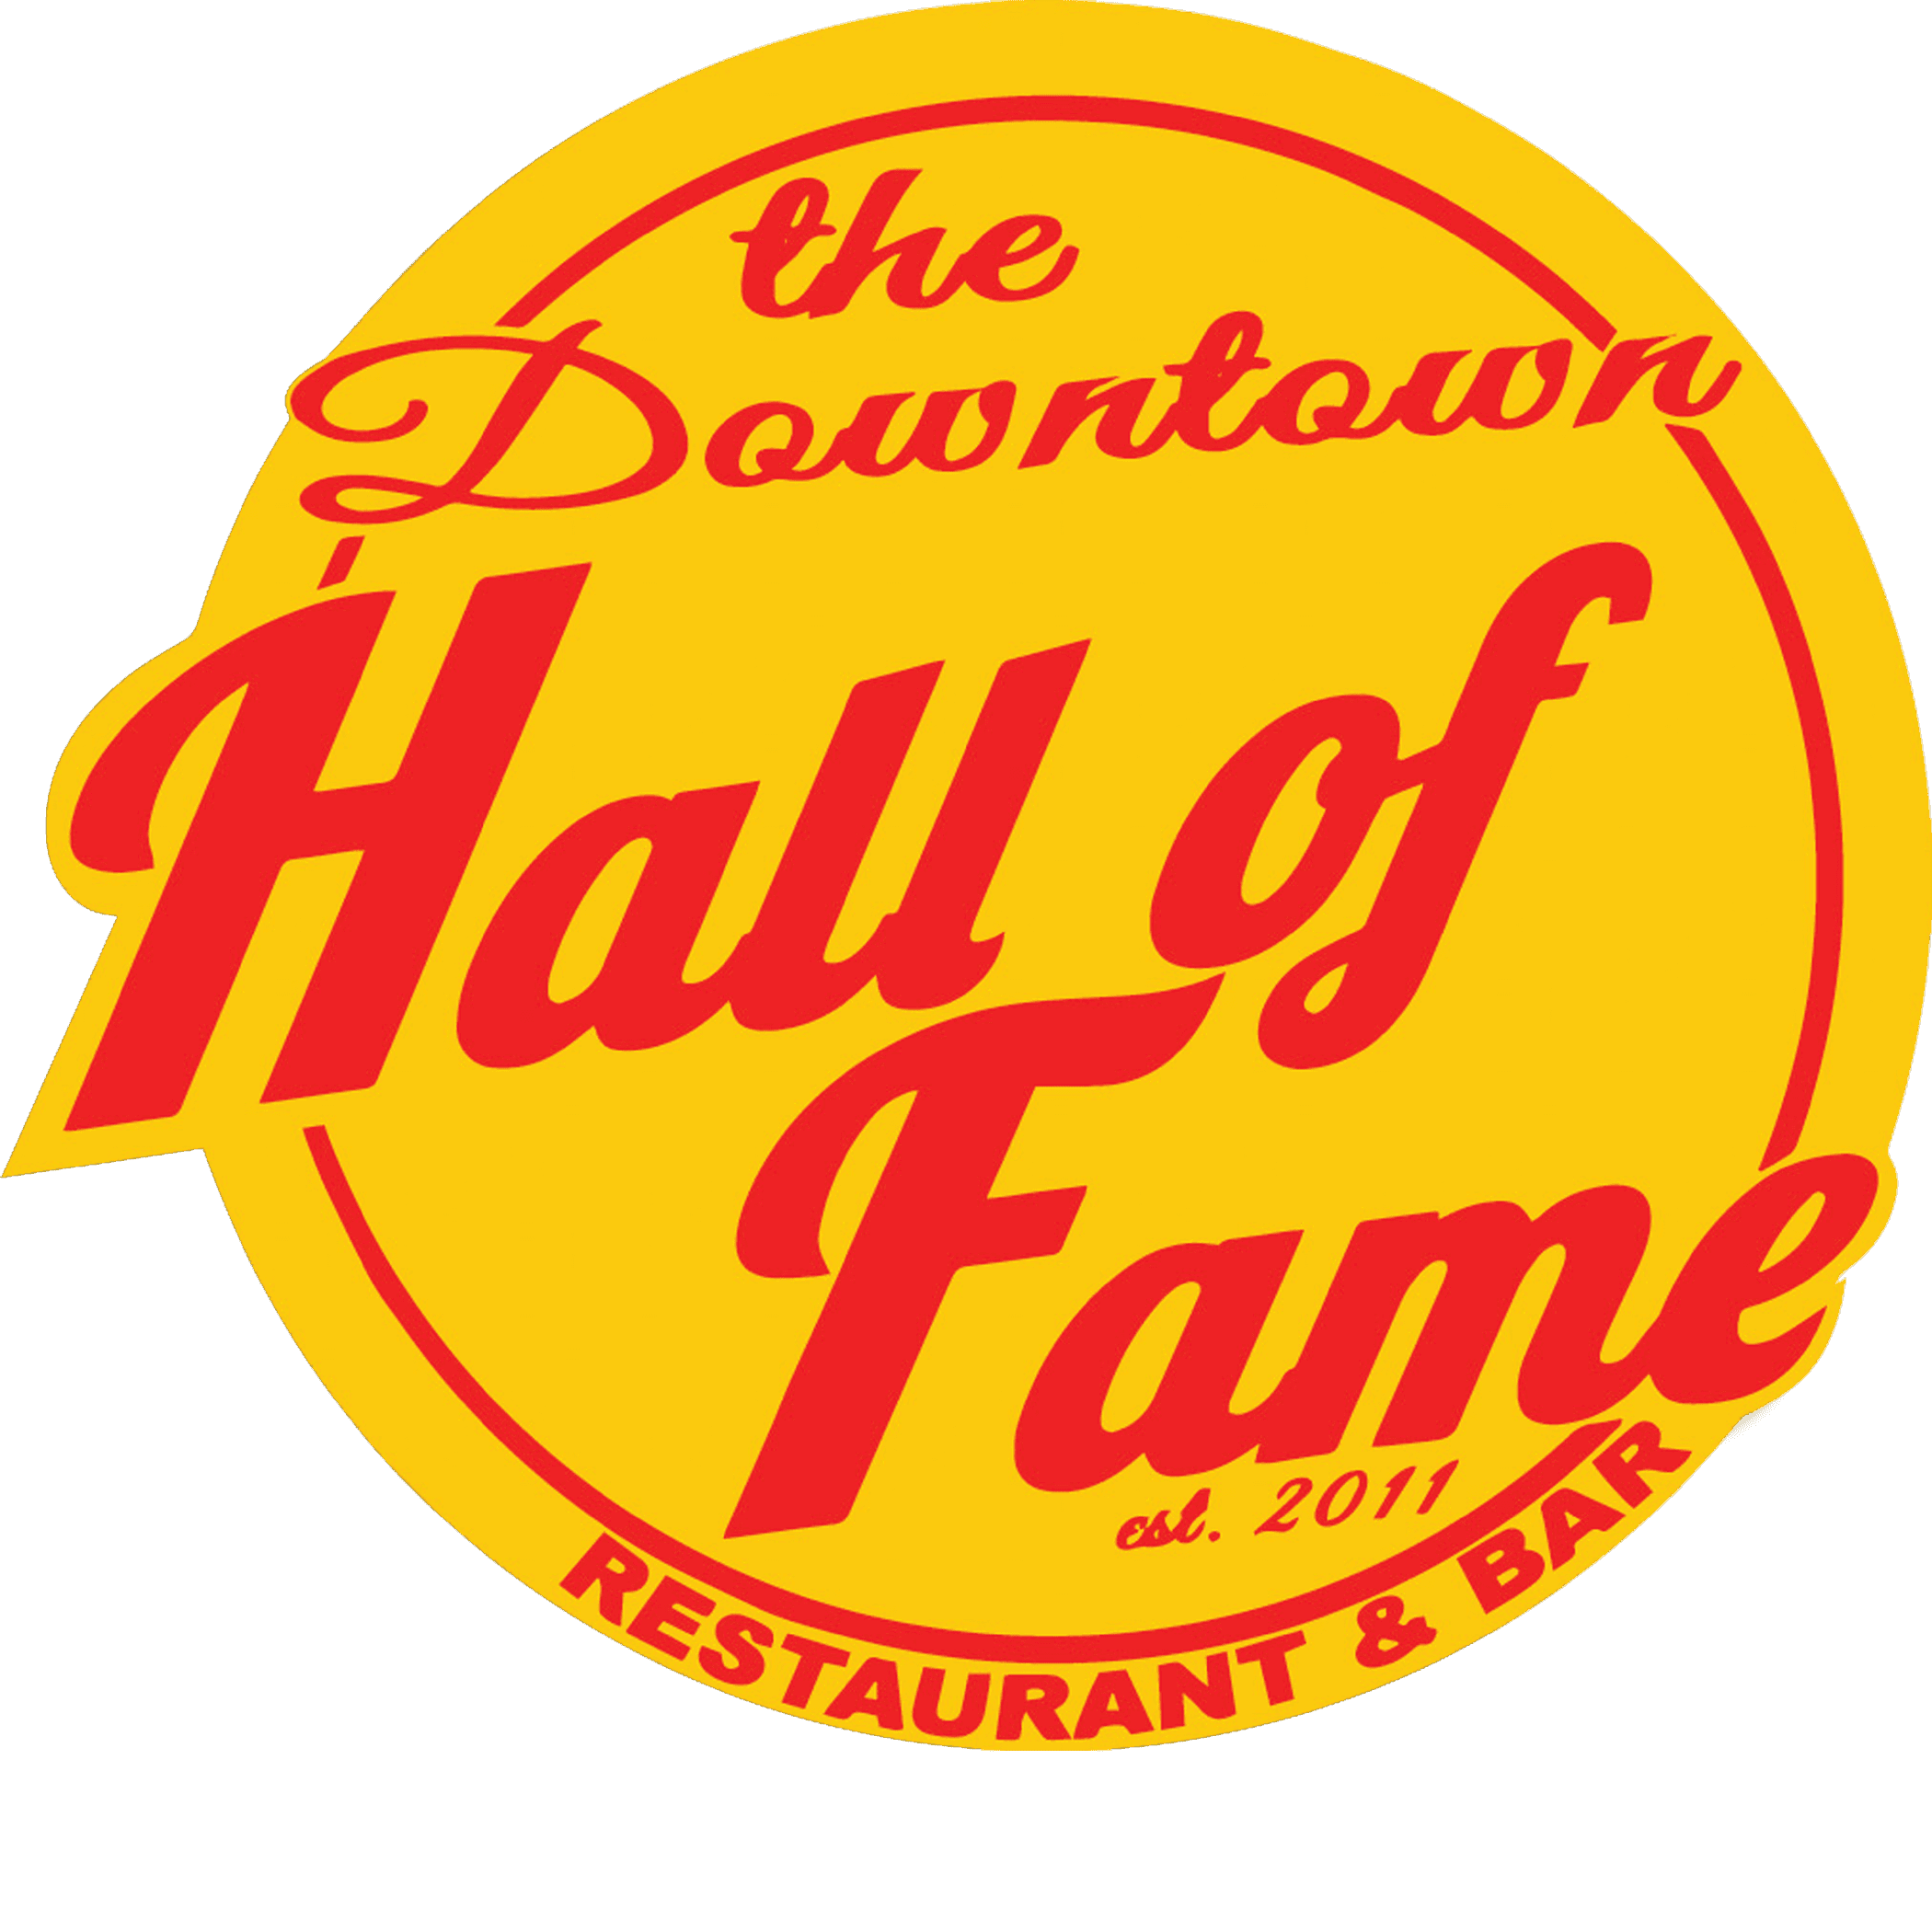 the downtown hall of fame